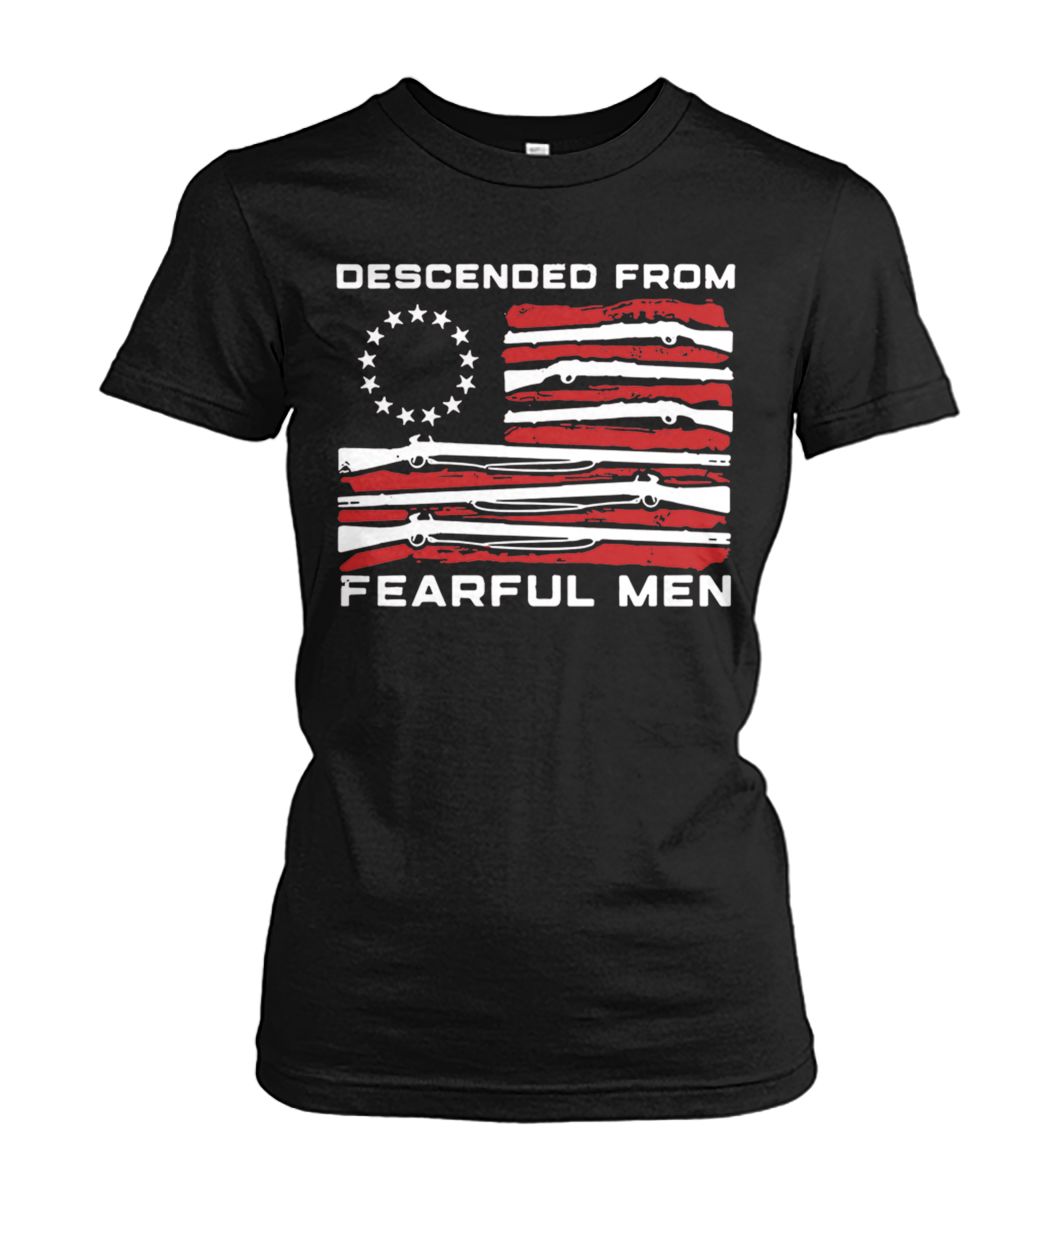 Betsy ross flag descended from fearful men women's crew tee